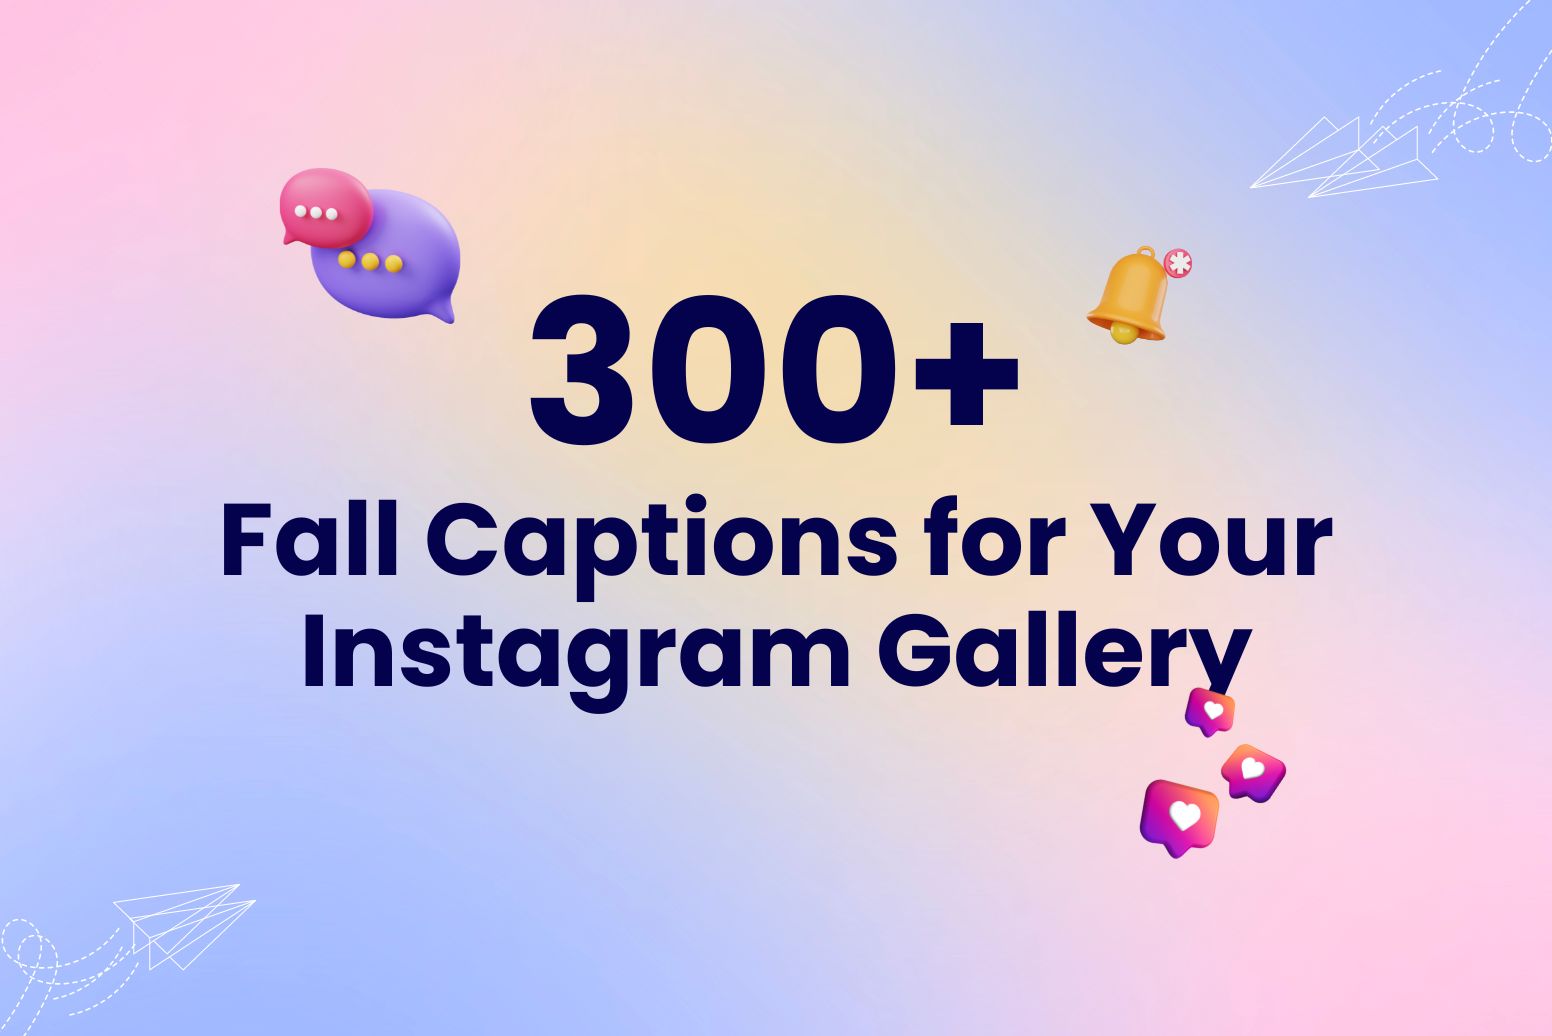 300+ Fall Captions for Your Instagram Gallery [Ultimate List]